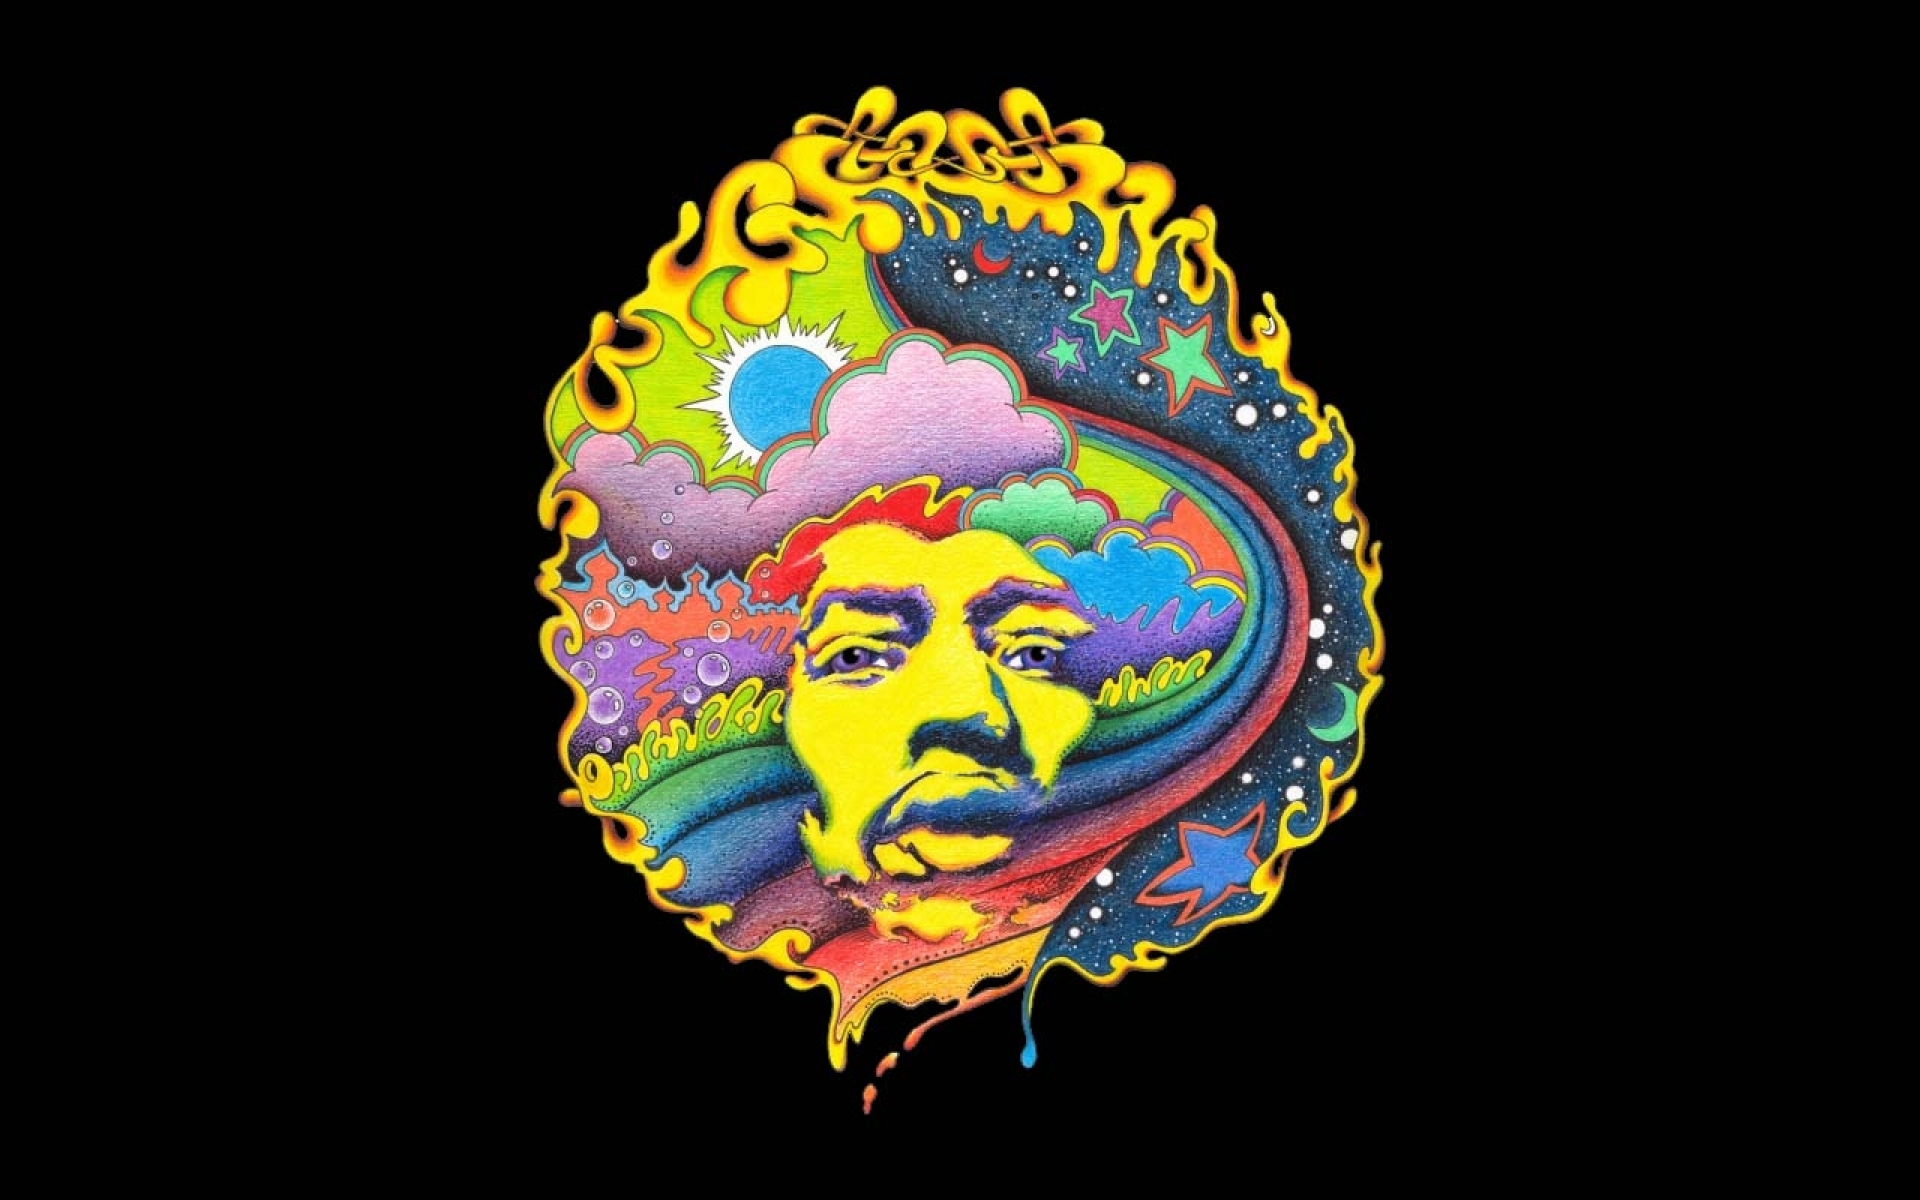 Gallery For Gt Jimi Hendrix Wallpaper Psychedelic